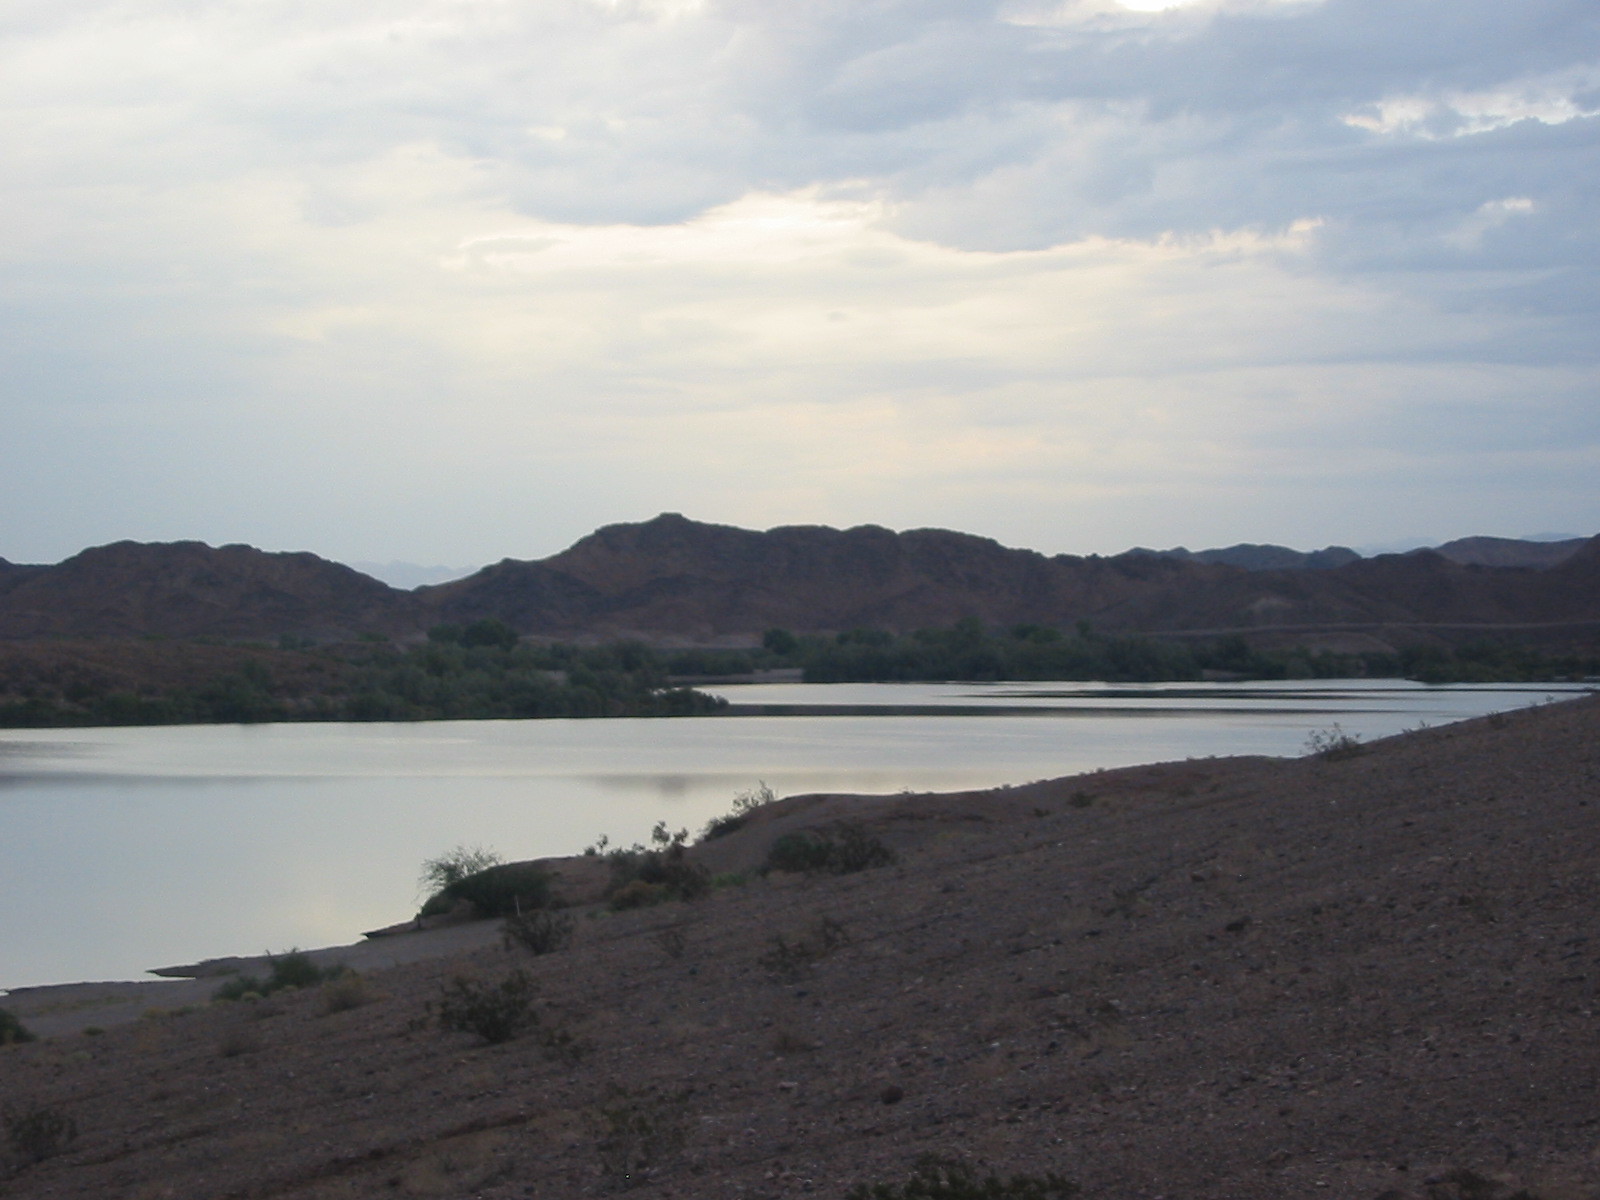 Colorado River with desert hills in the background